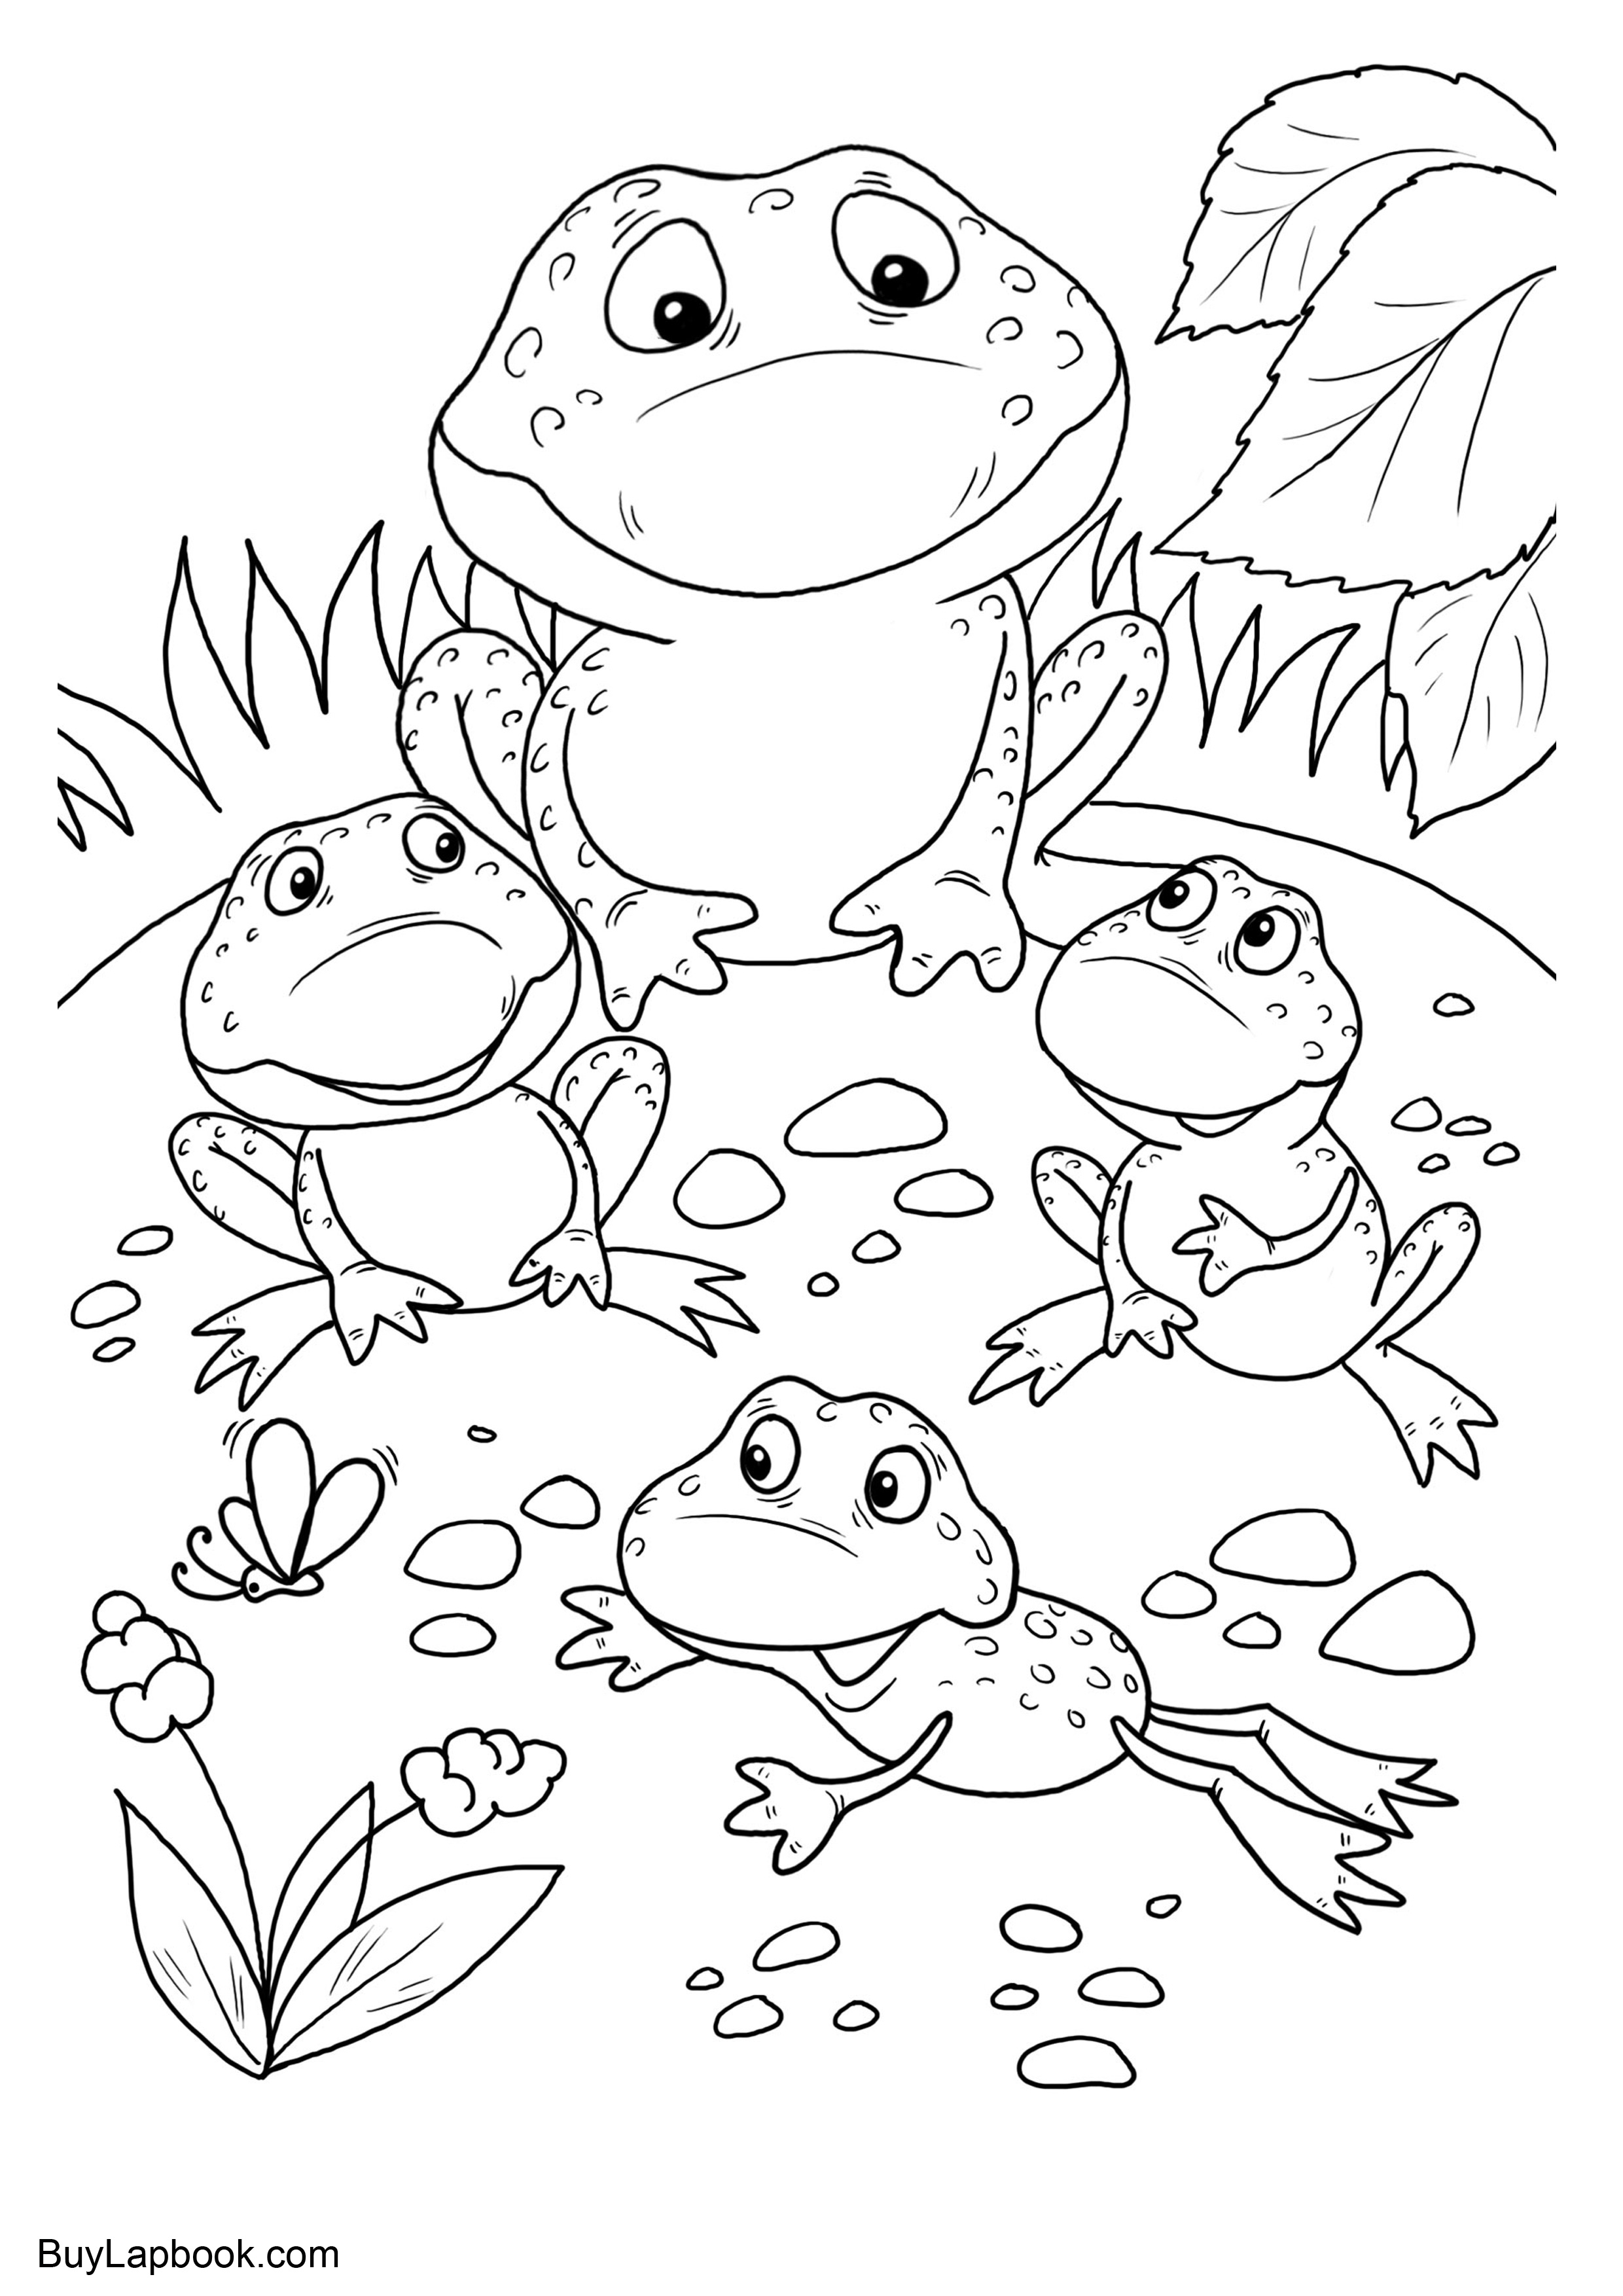 The life cycle of a frog free coloring pages